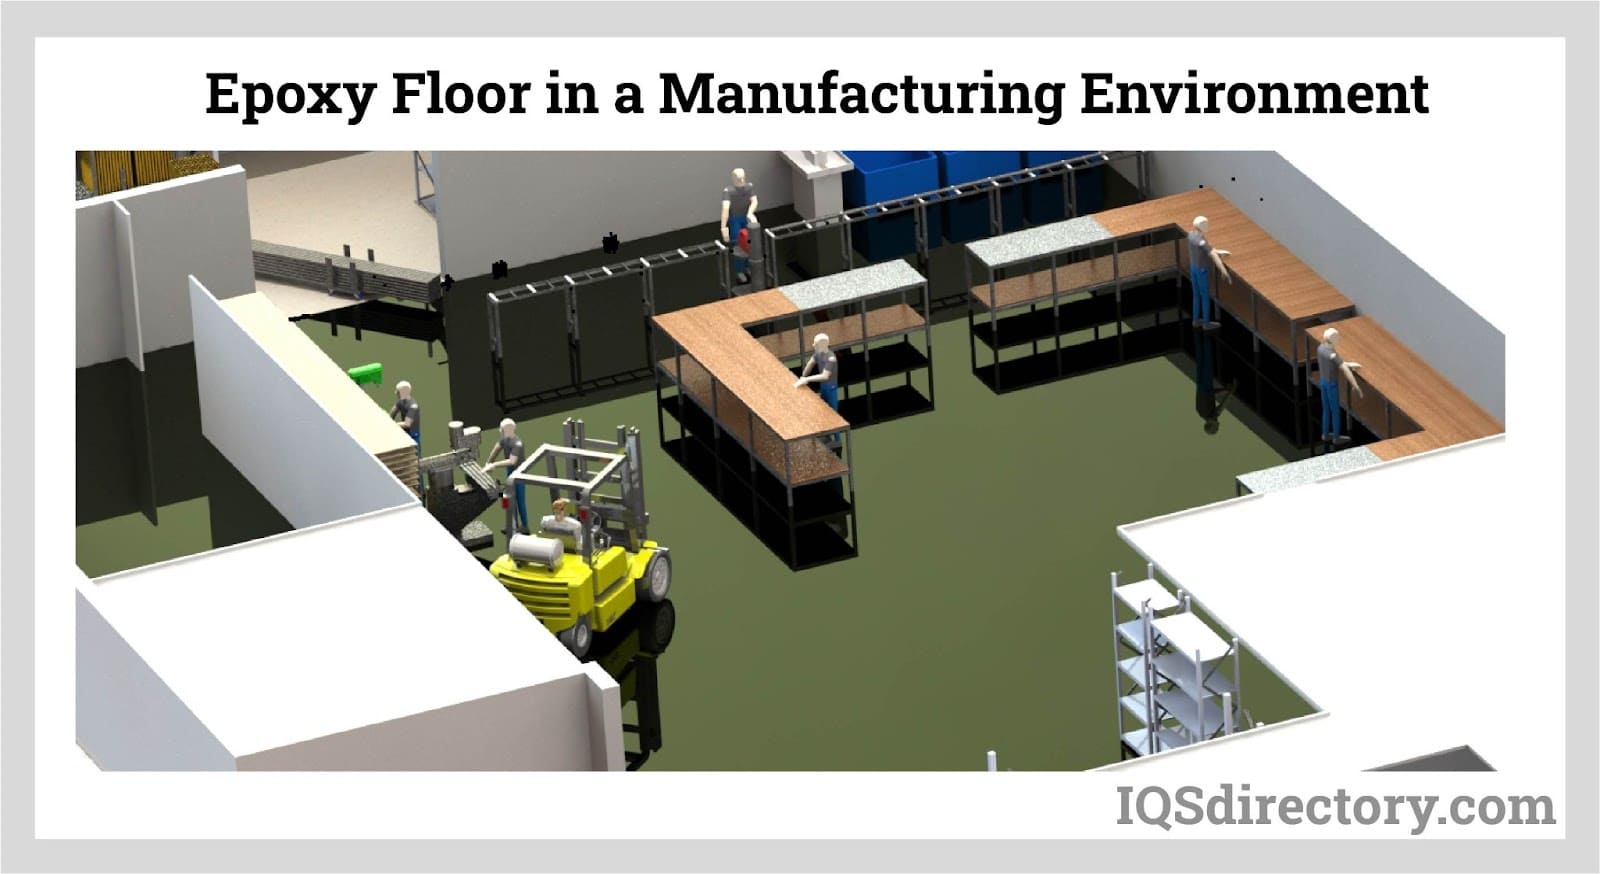 Epoxy Floor in a Manufacturing Environment